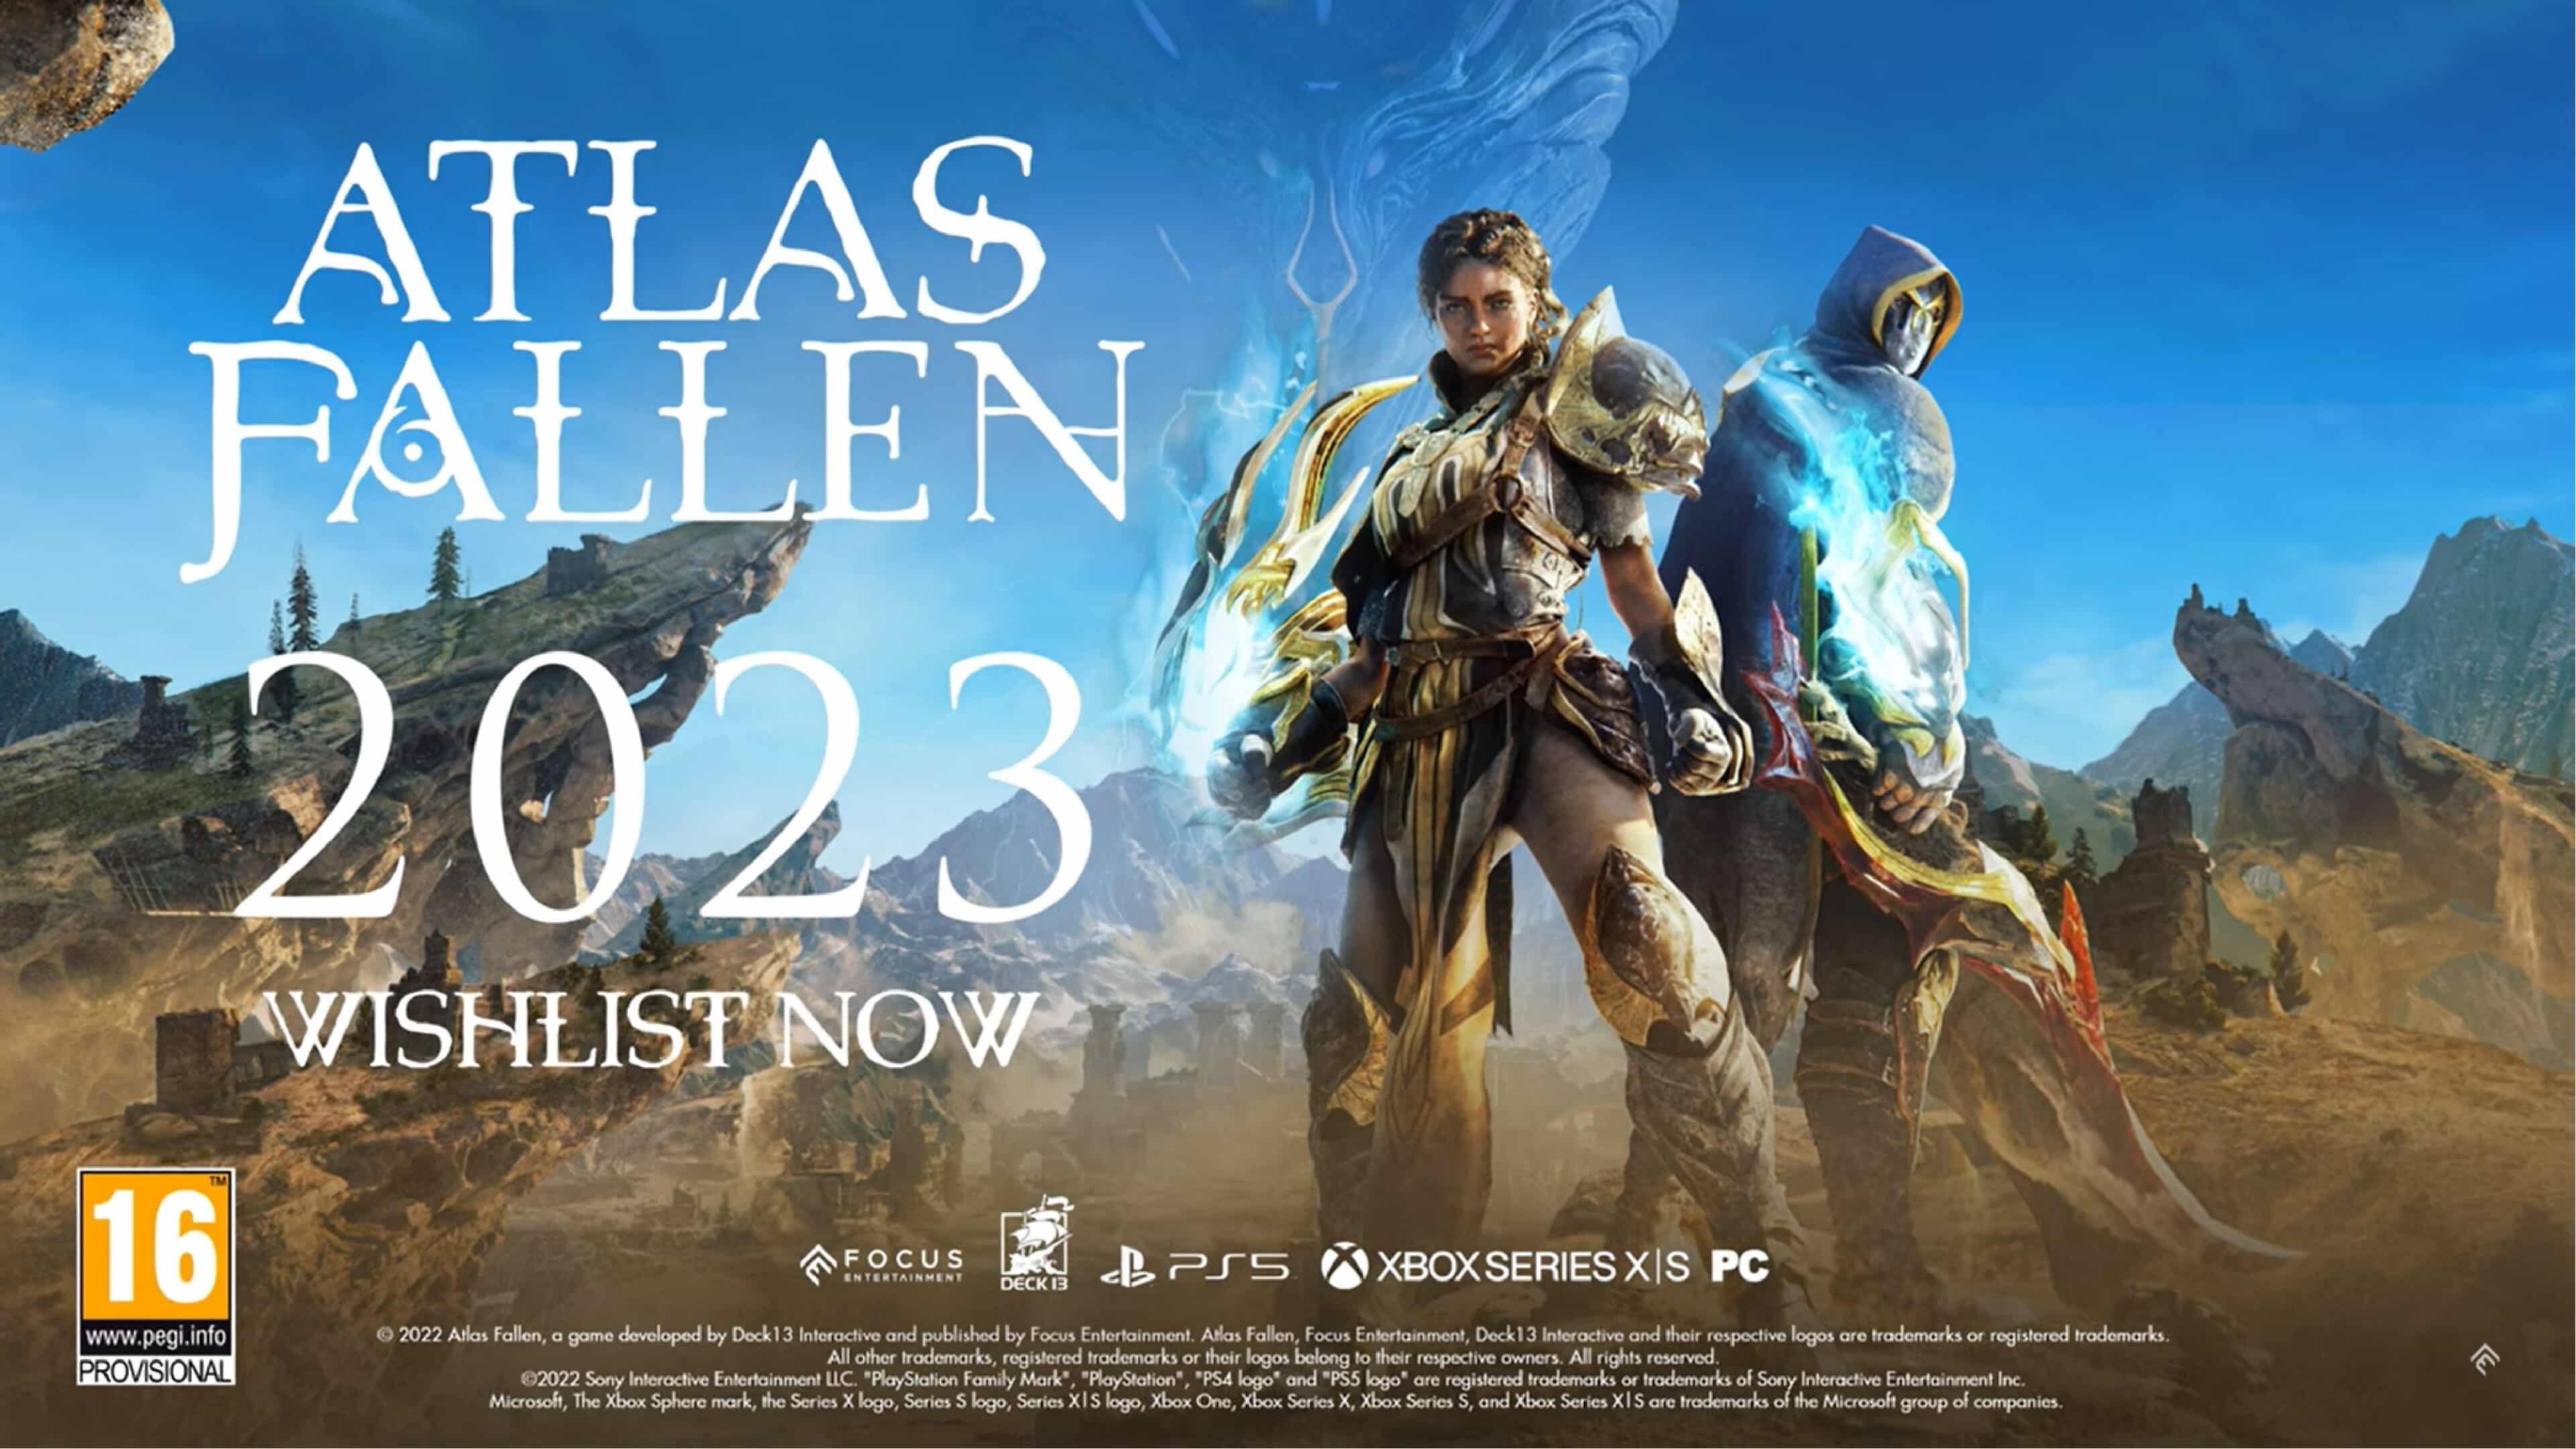 Atlas Fallen is the new game from Deck13 that will be released in 2023 for Xbox Series X/S, PS5, and PC